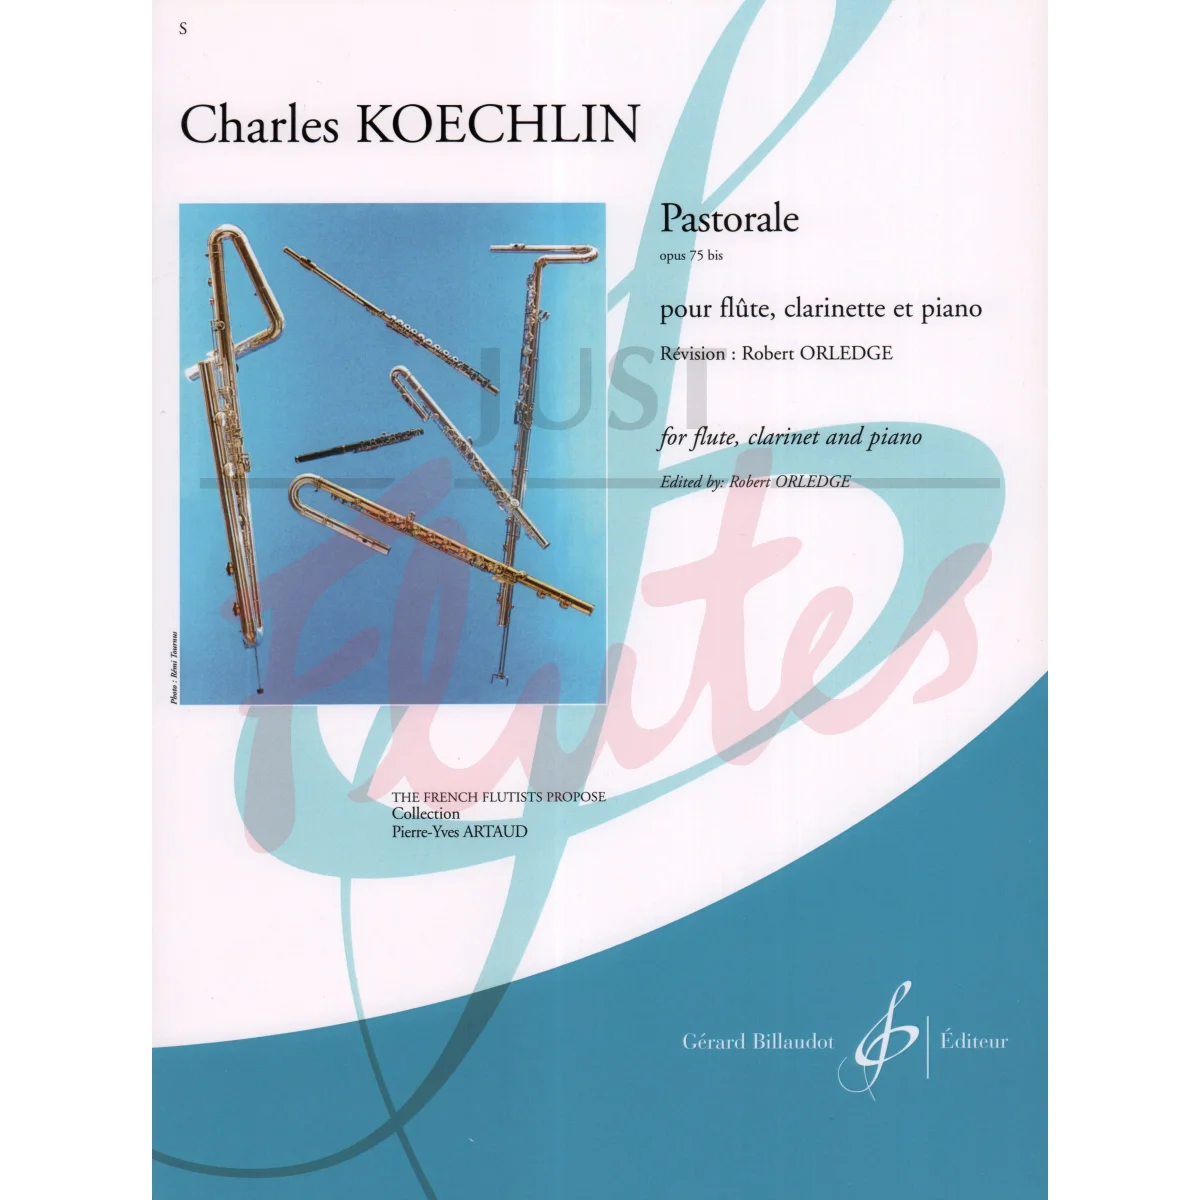 Pastorale for Flute, Clarinet and Piano